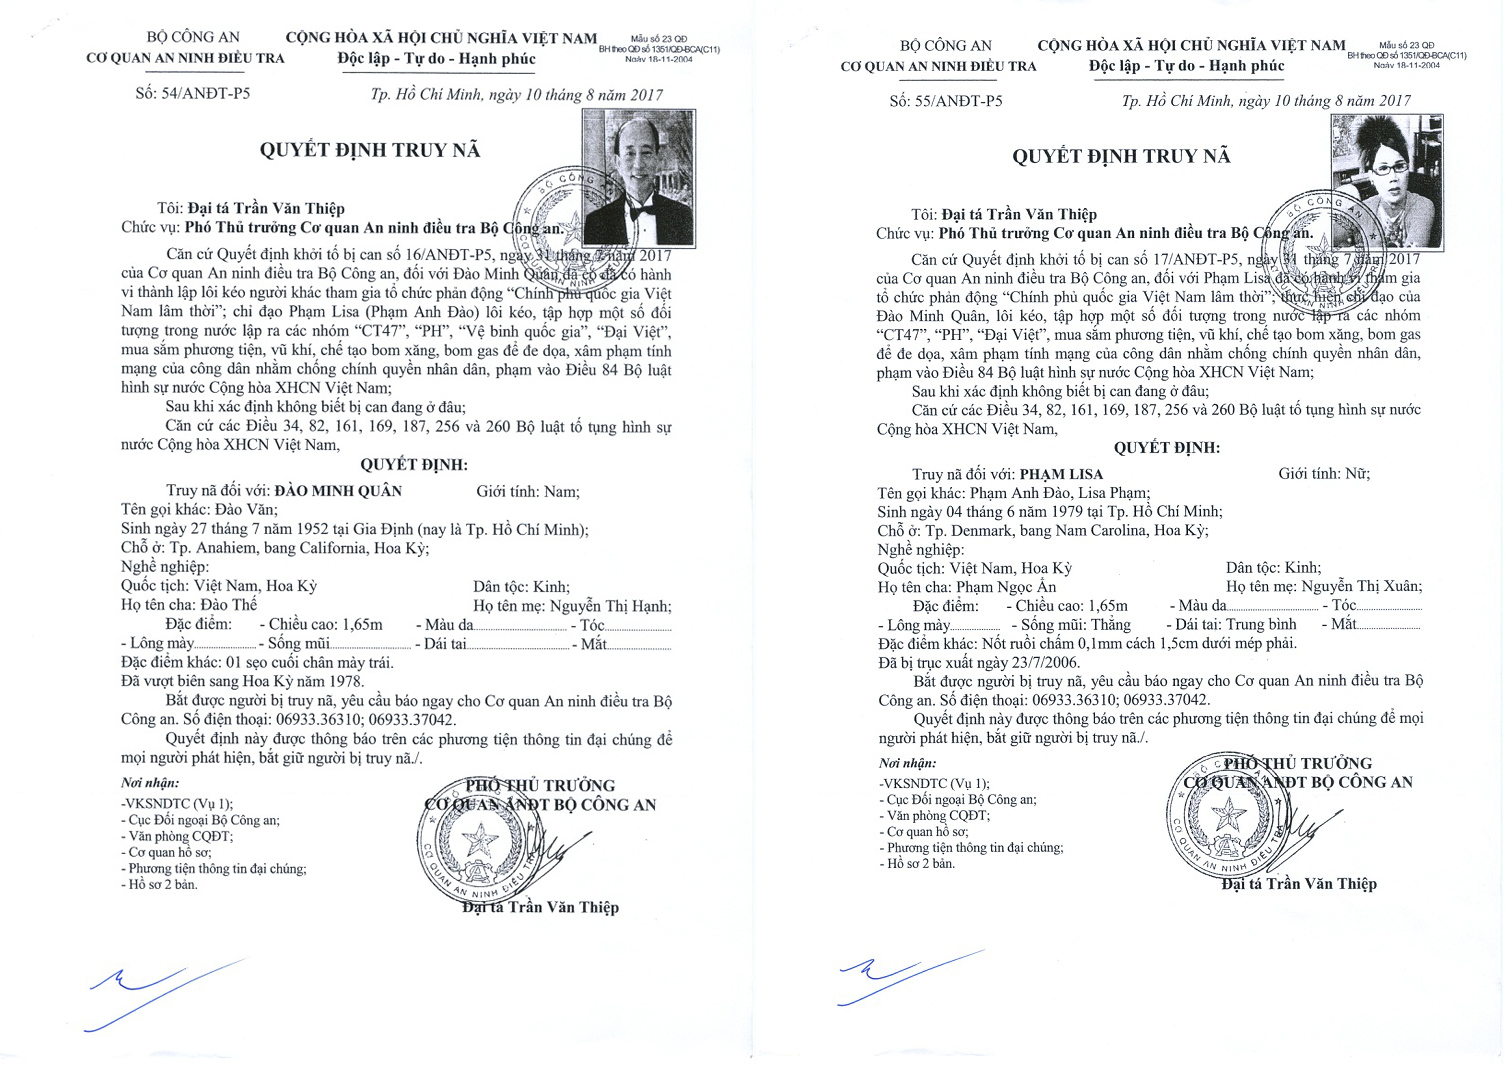 The wanted orders for Dao Minh Quan and Pham Anh Dao, aka Pham Lisa, issued by Vietnam’s Ministry of Public Security. Photo: Tuoi Tre